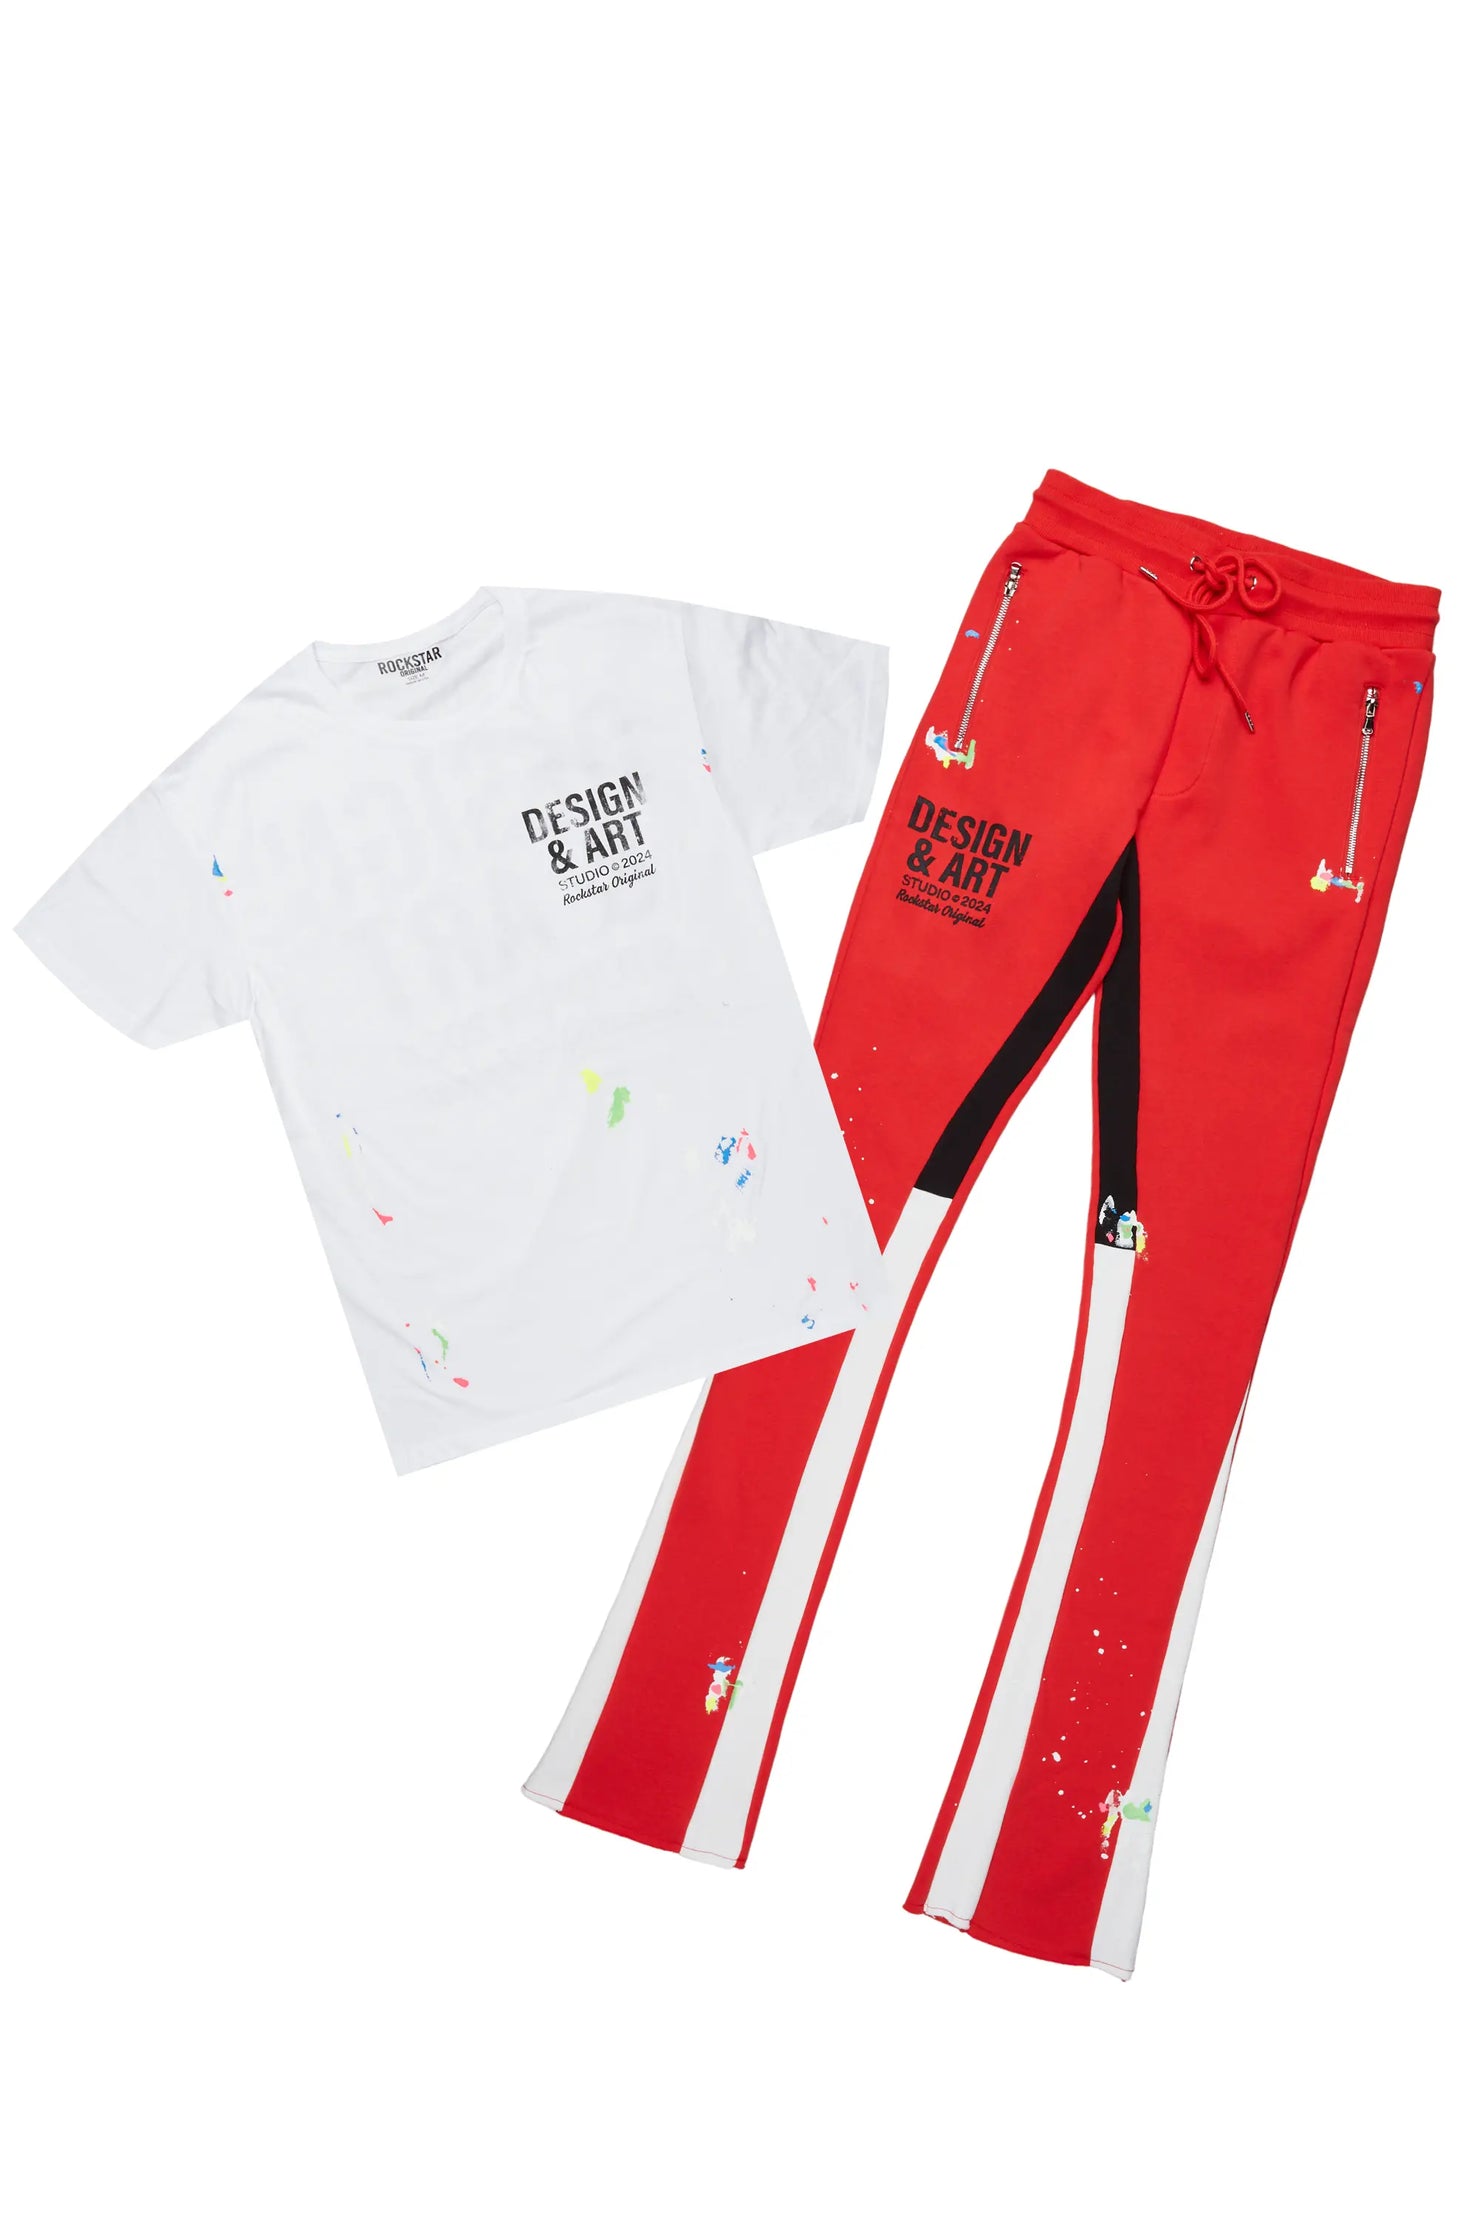 Mancha White/Red T-Shirt Stacked Flare Track Set